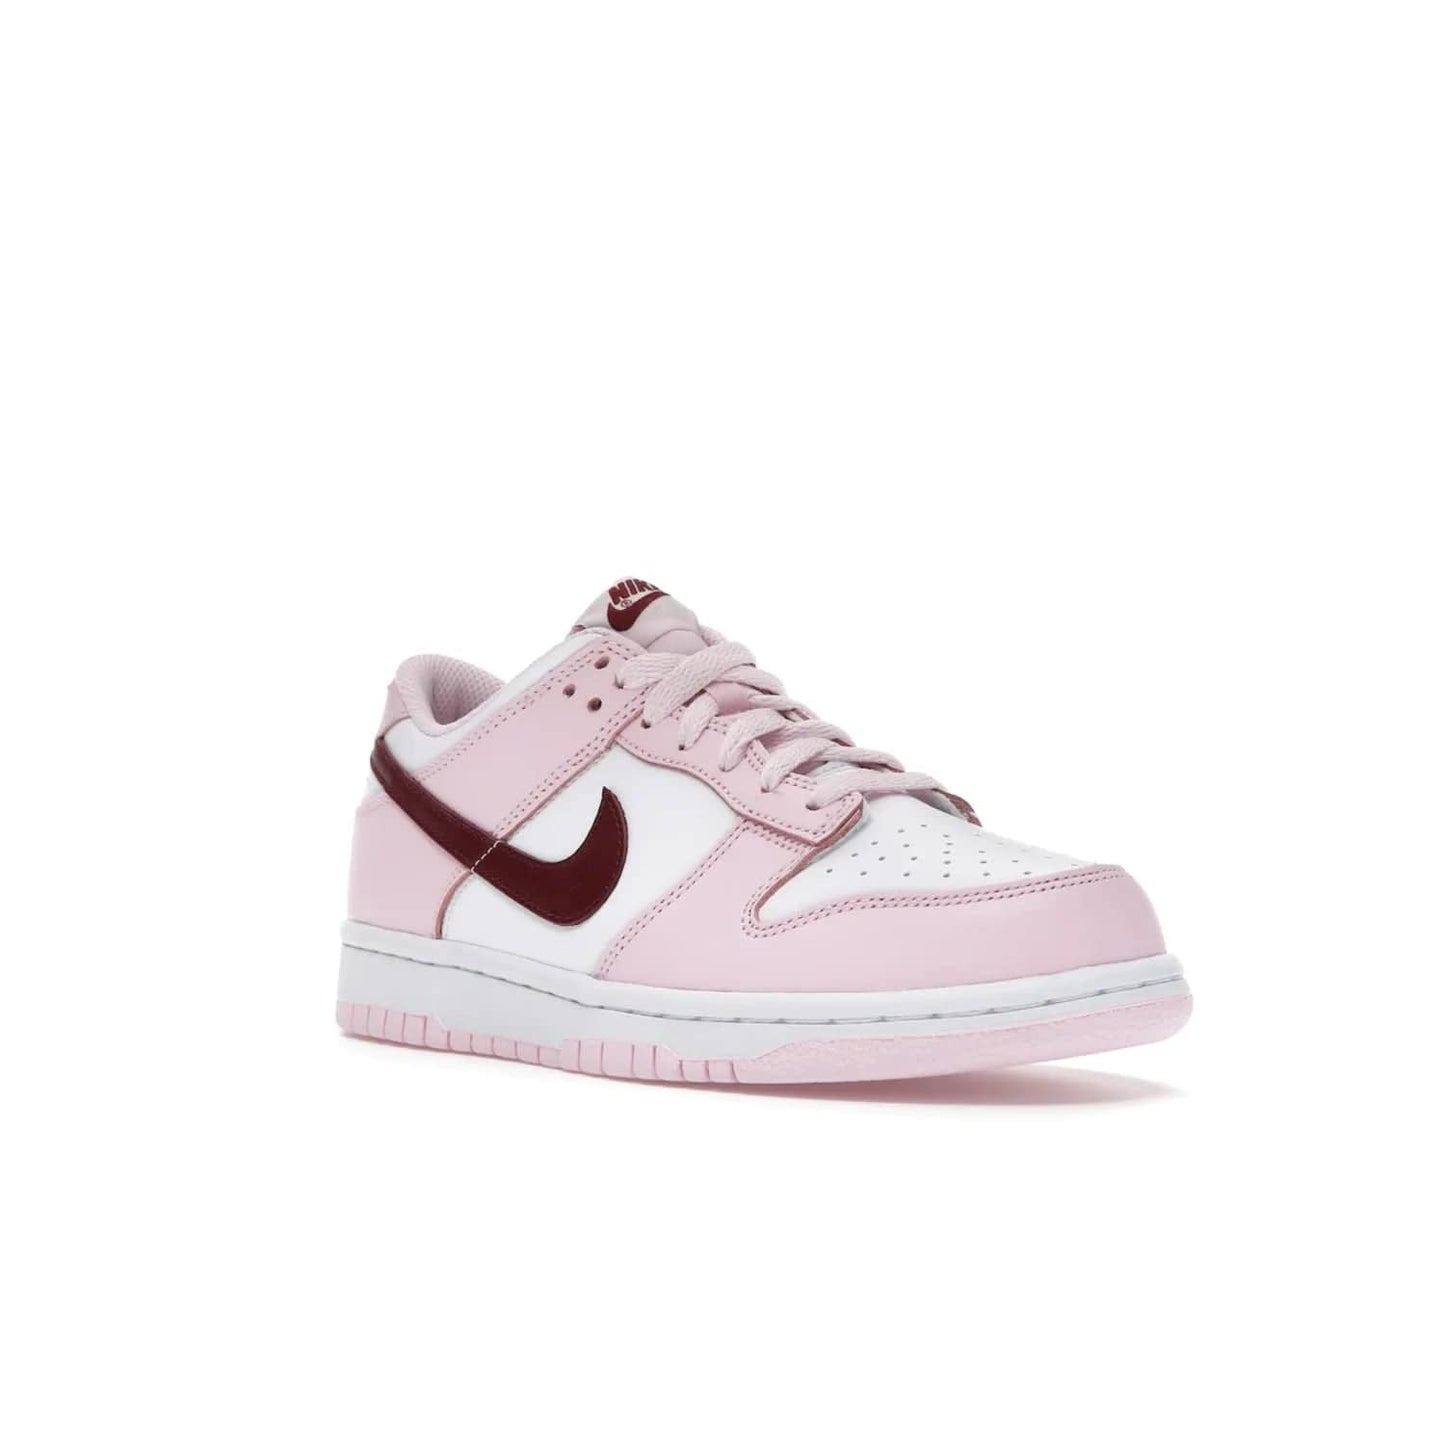 Nike Dunk Low Pink Foam Red White (GS) - Image 6 - Only at www.BallersClubKickz.com - #
Introducing the daring and stylish Nike Dunk Low Pink Foam Red White (GS) sneaker for grade schoolers. White leather with pink overlays and Dark Beetroot accents, classic Nike Dunk midsole and pink outsole. Released August 2021 for $85.